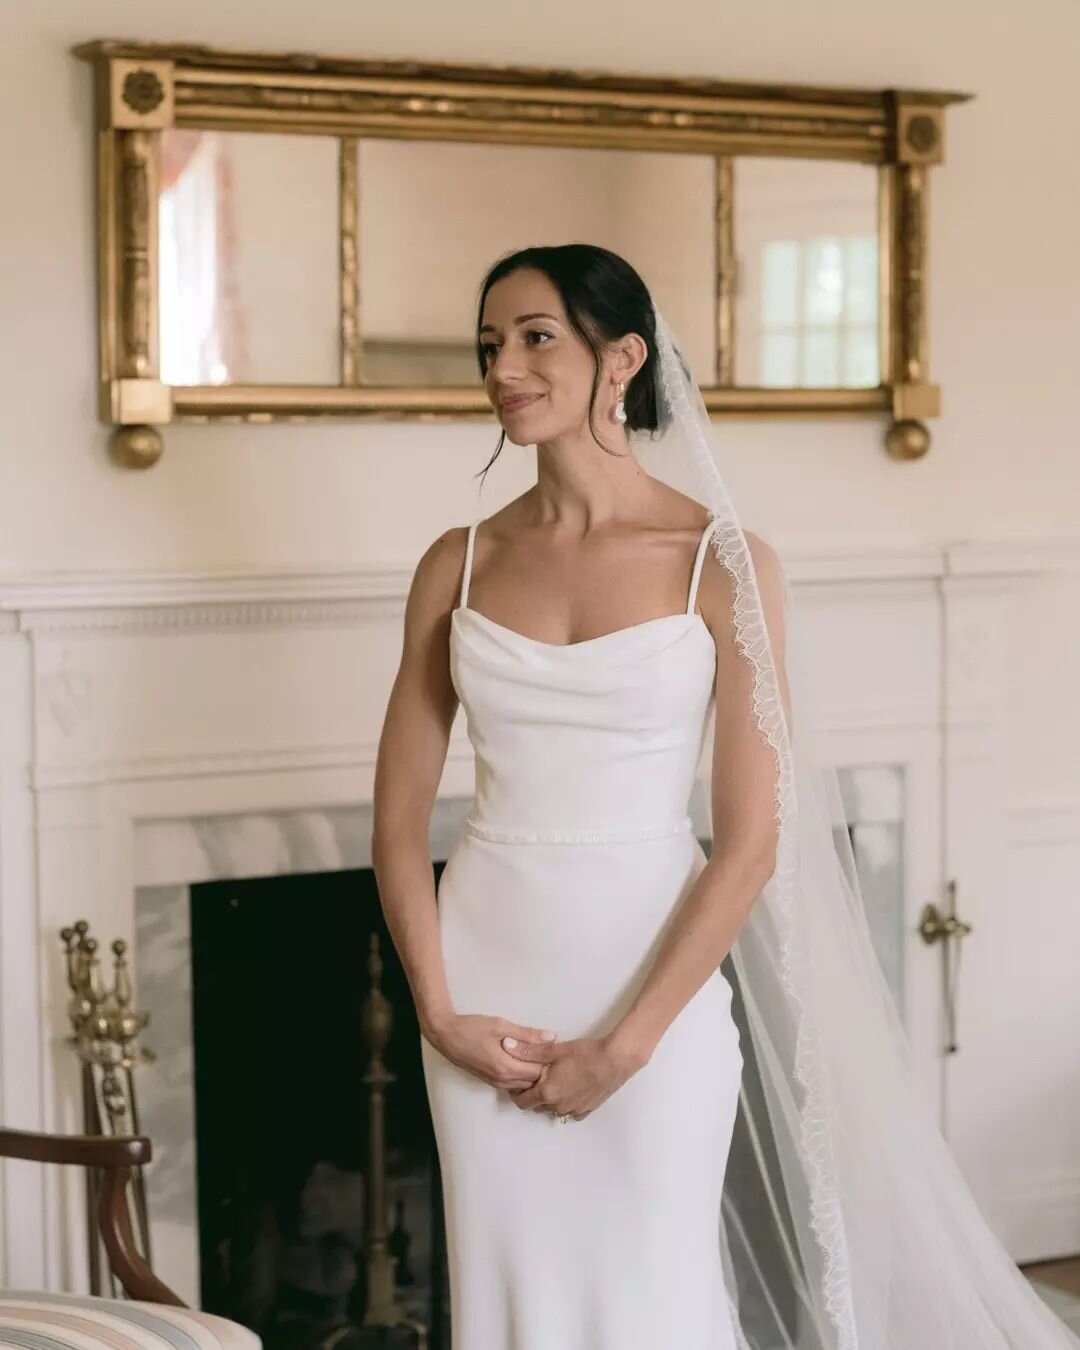 Beautiful dreamy Mae bride Julianne, on her wedding day! I am so delighted to see another Mae bride, thank you for sharing these wonderful images with us!&nbsp;
​
​Special thanks
​Bride @j_balzo
Photographer @lisamrigby
​Bridal Boutique @hinterlandbr